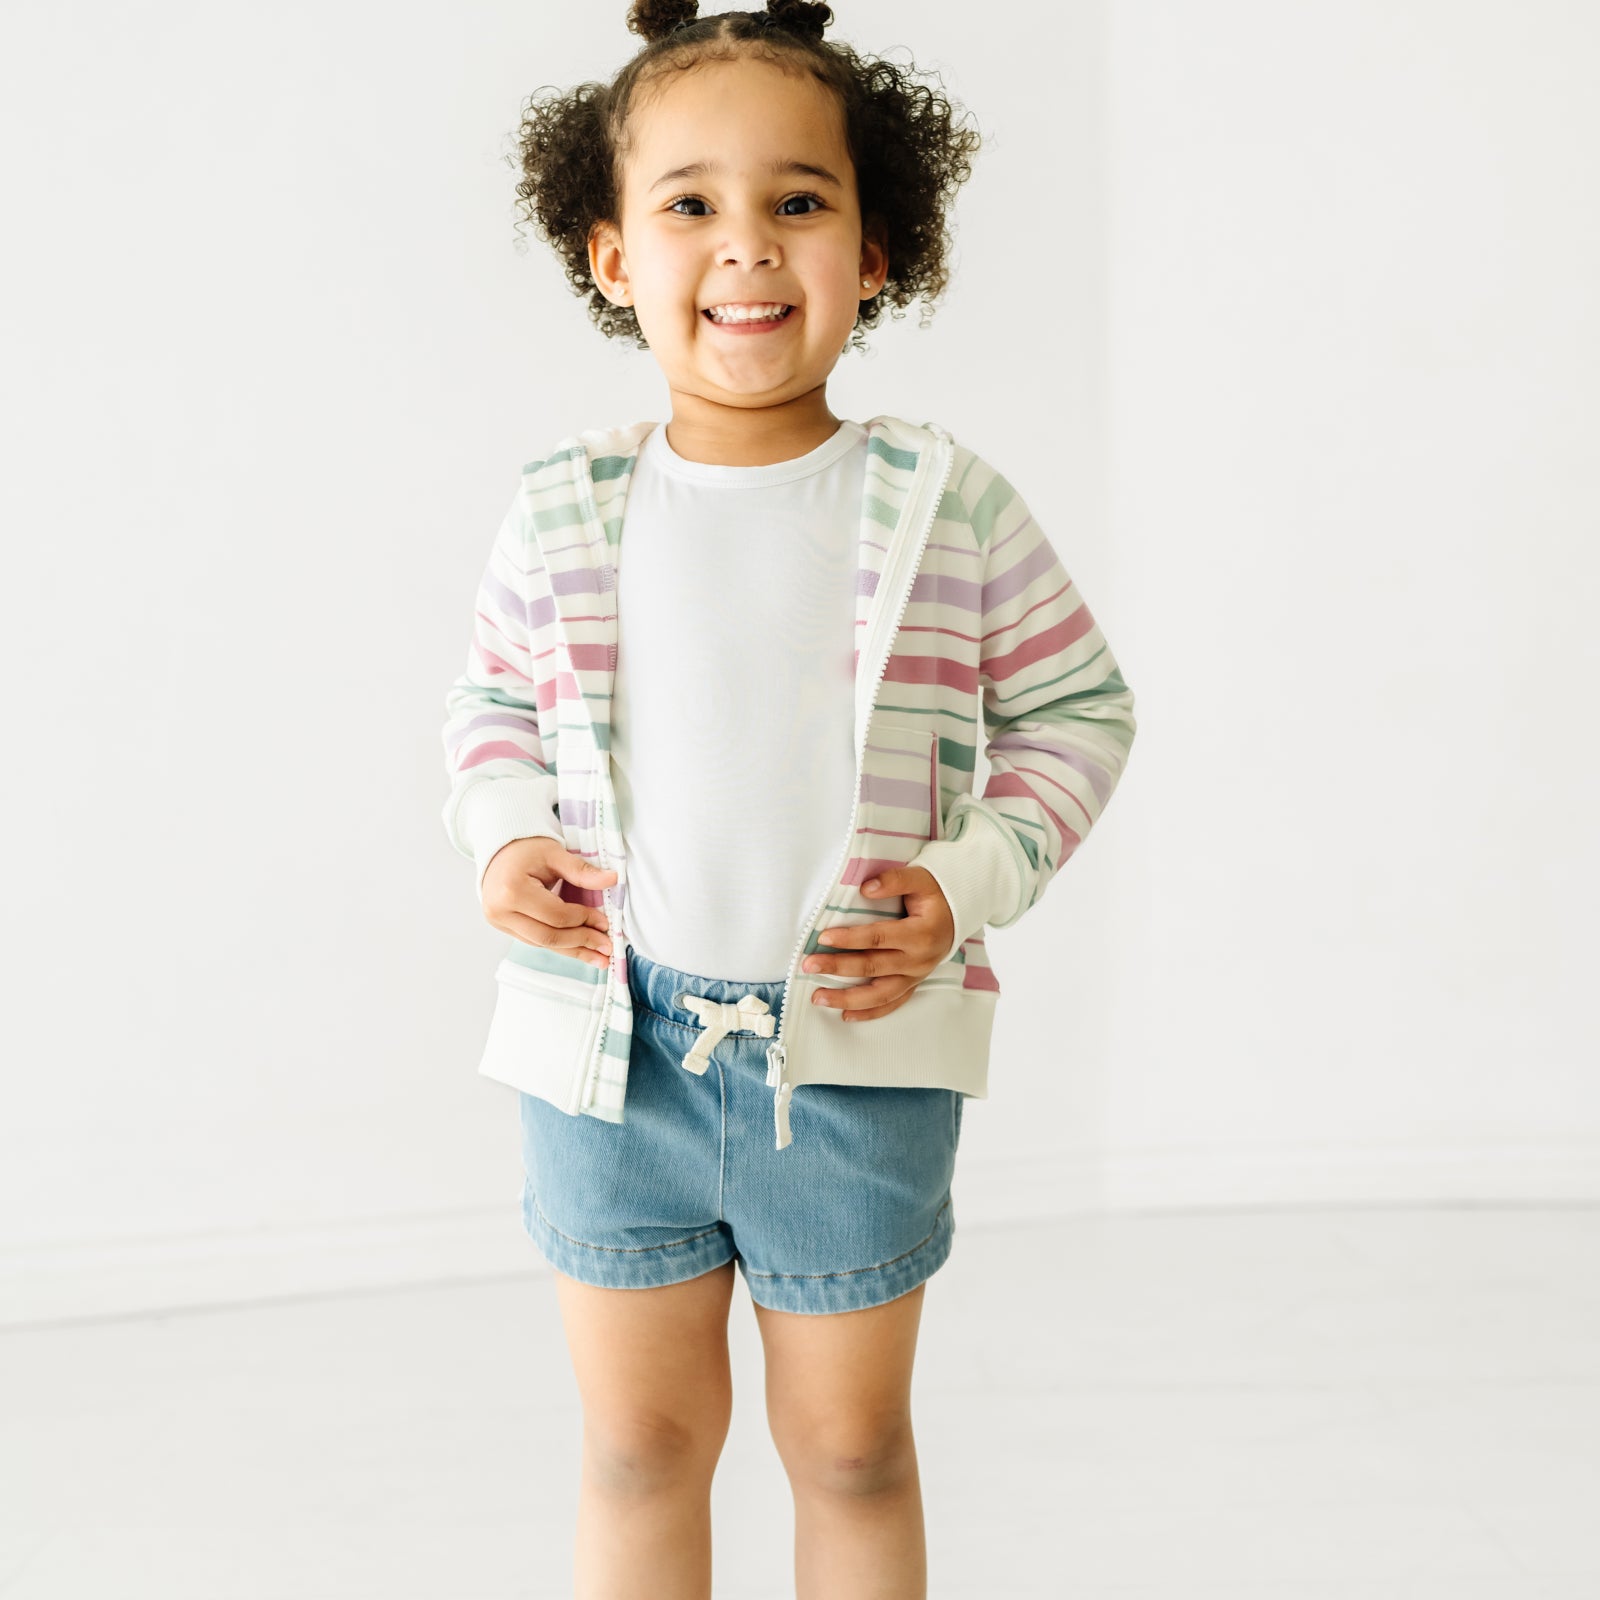 Alternate image of a child wearing Light Blue denim shorts and a coordinating top